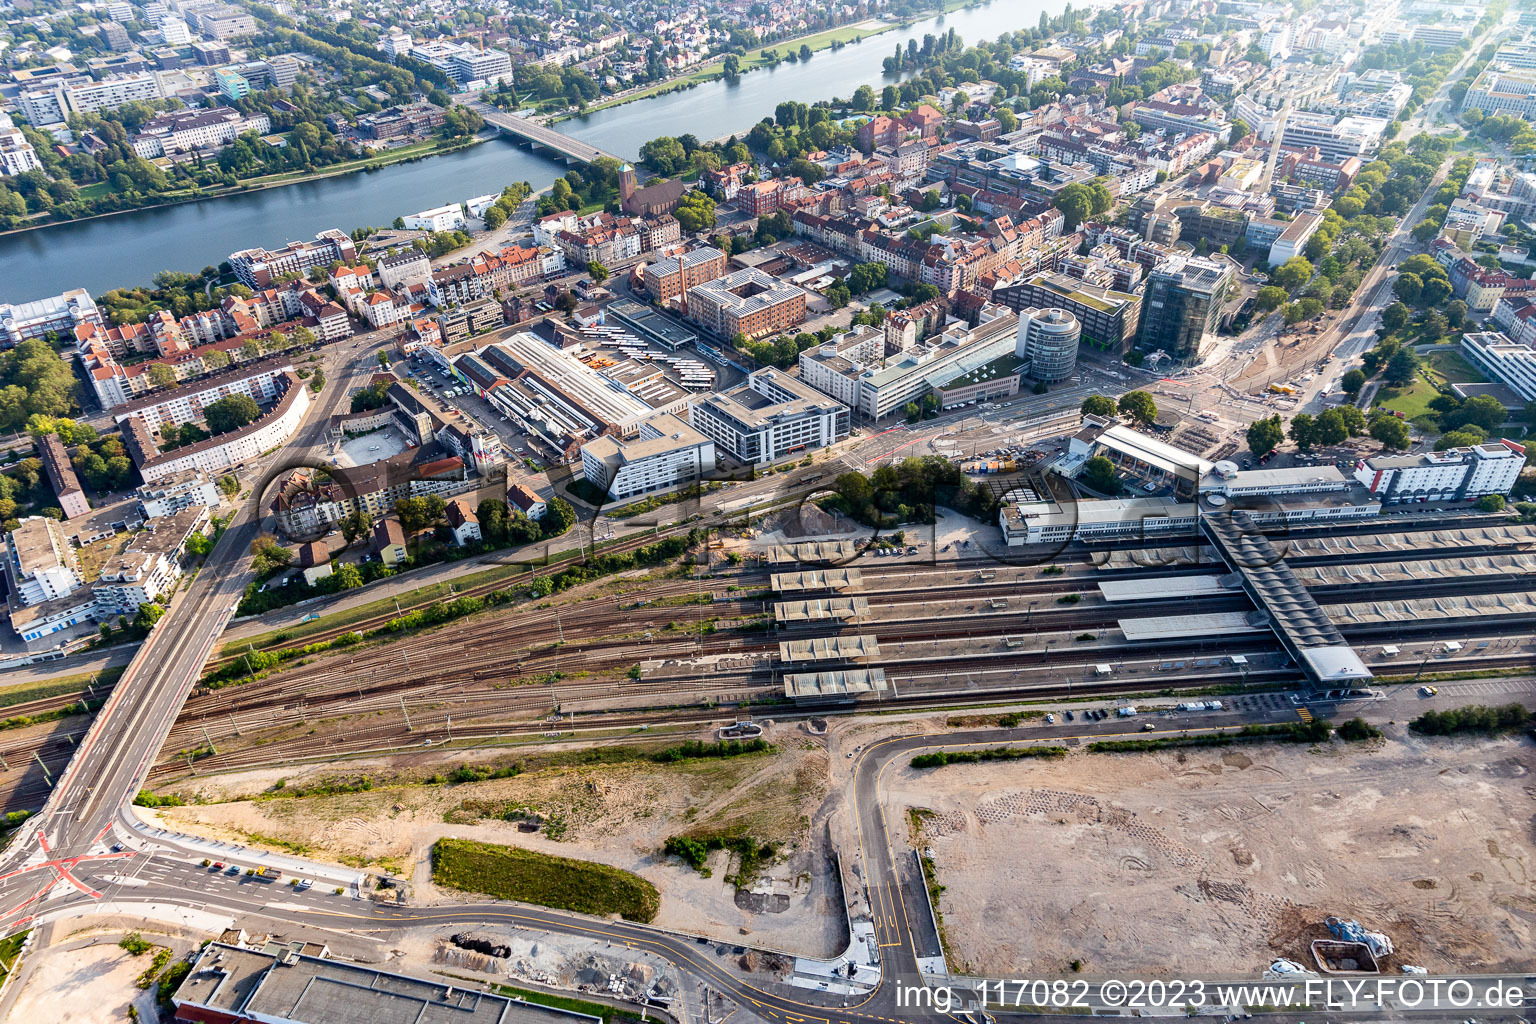 Aerial view of District Bergheim between Neckar river and central station in Heidelberg in the state Baden-Wurttemberg, Germany